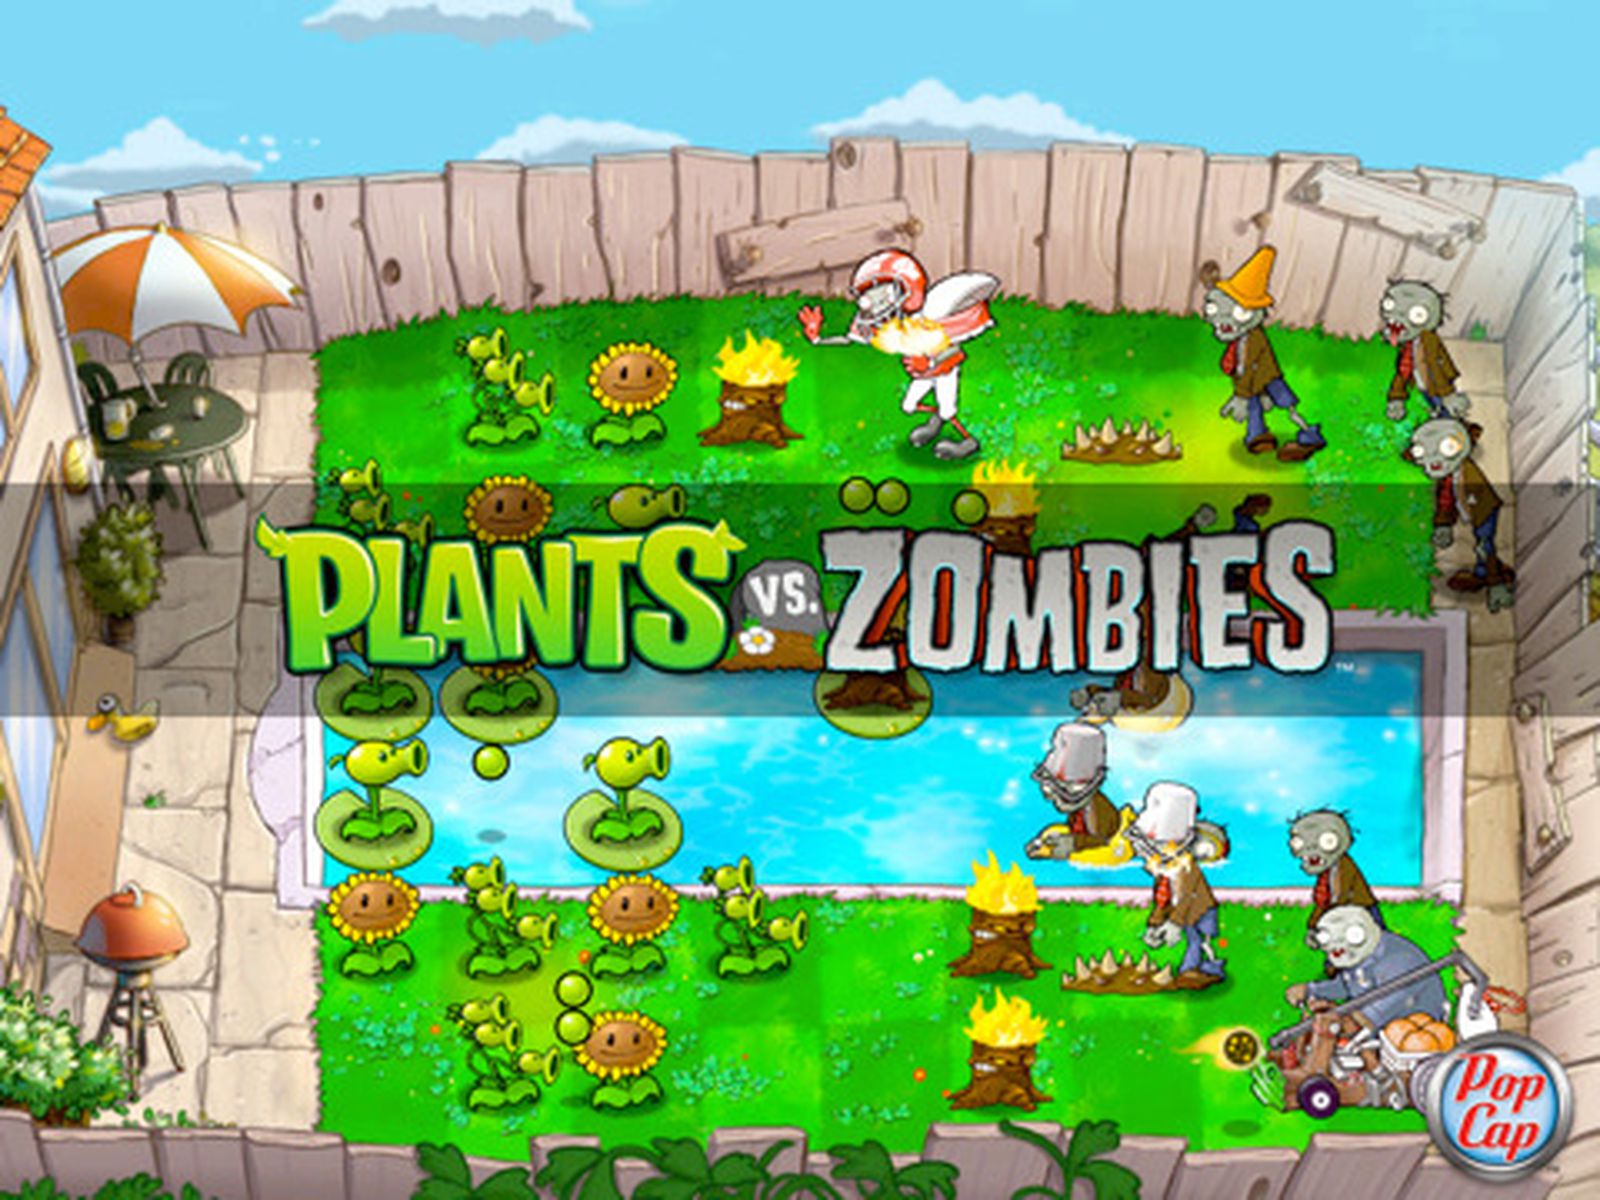 New 'Plants vs. Zombies 2' game introduces time travel